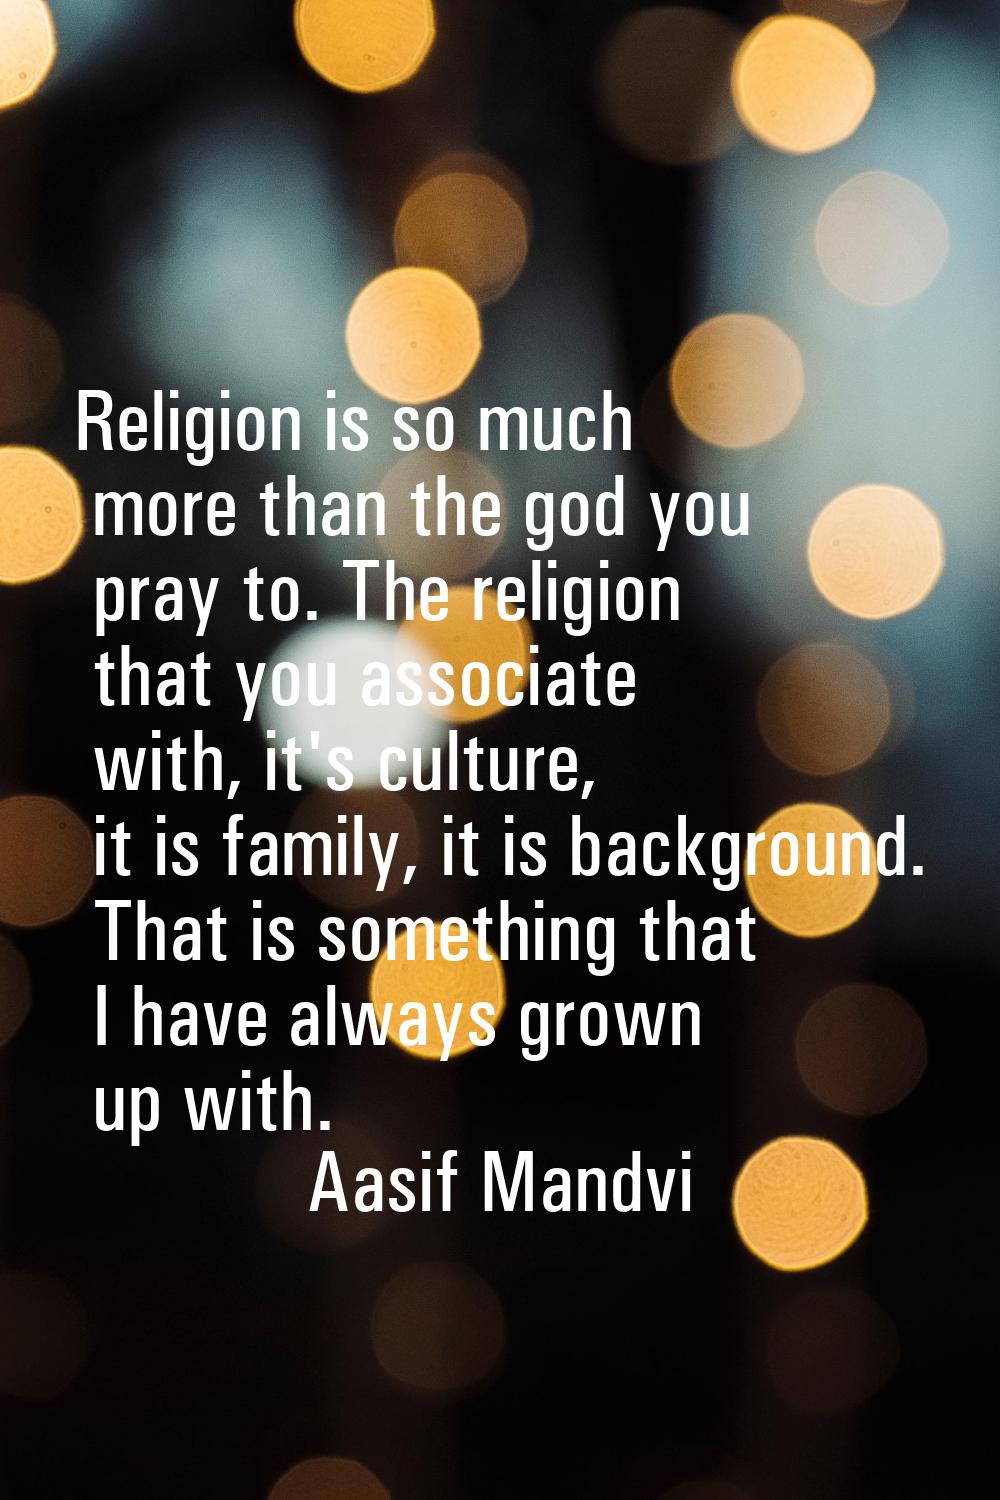 Religion is so much more than the god you pray to. The religion that you associate with, it's cultu